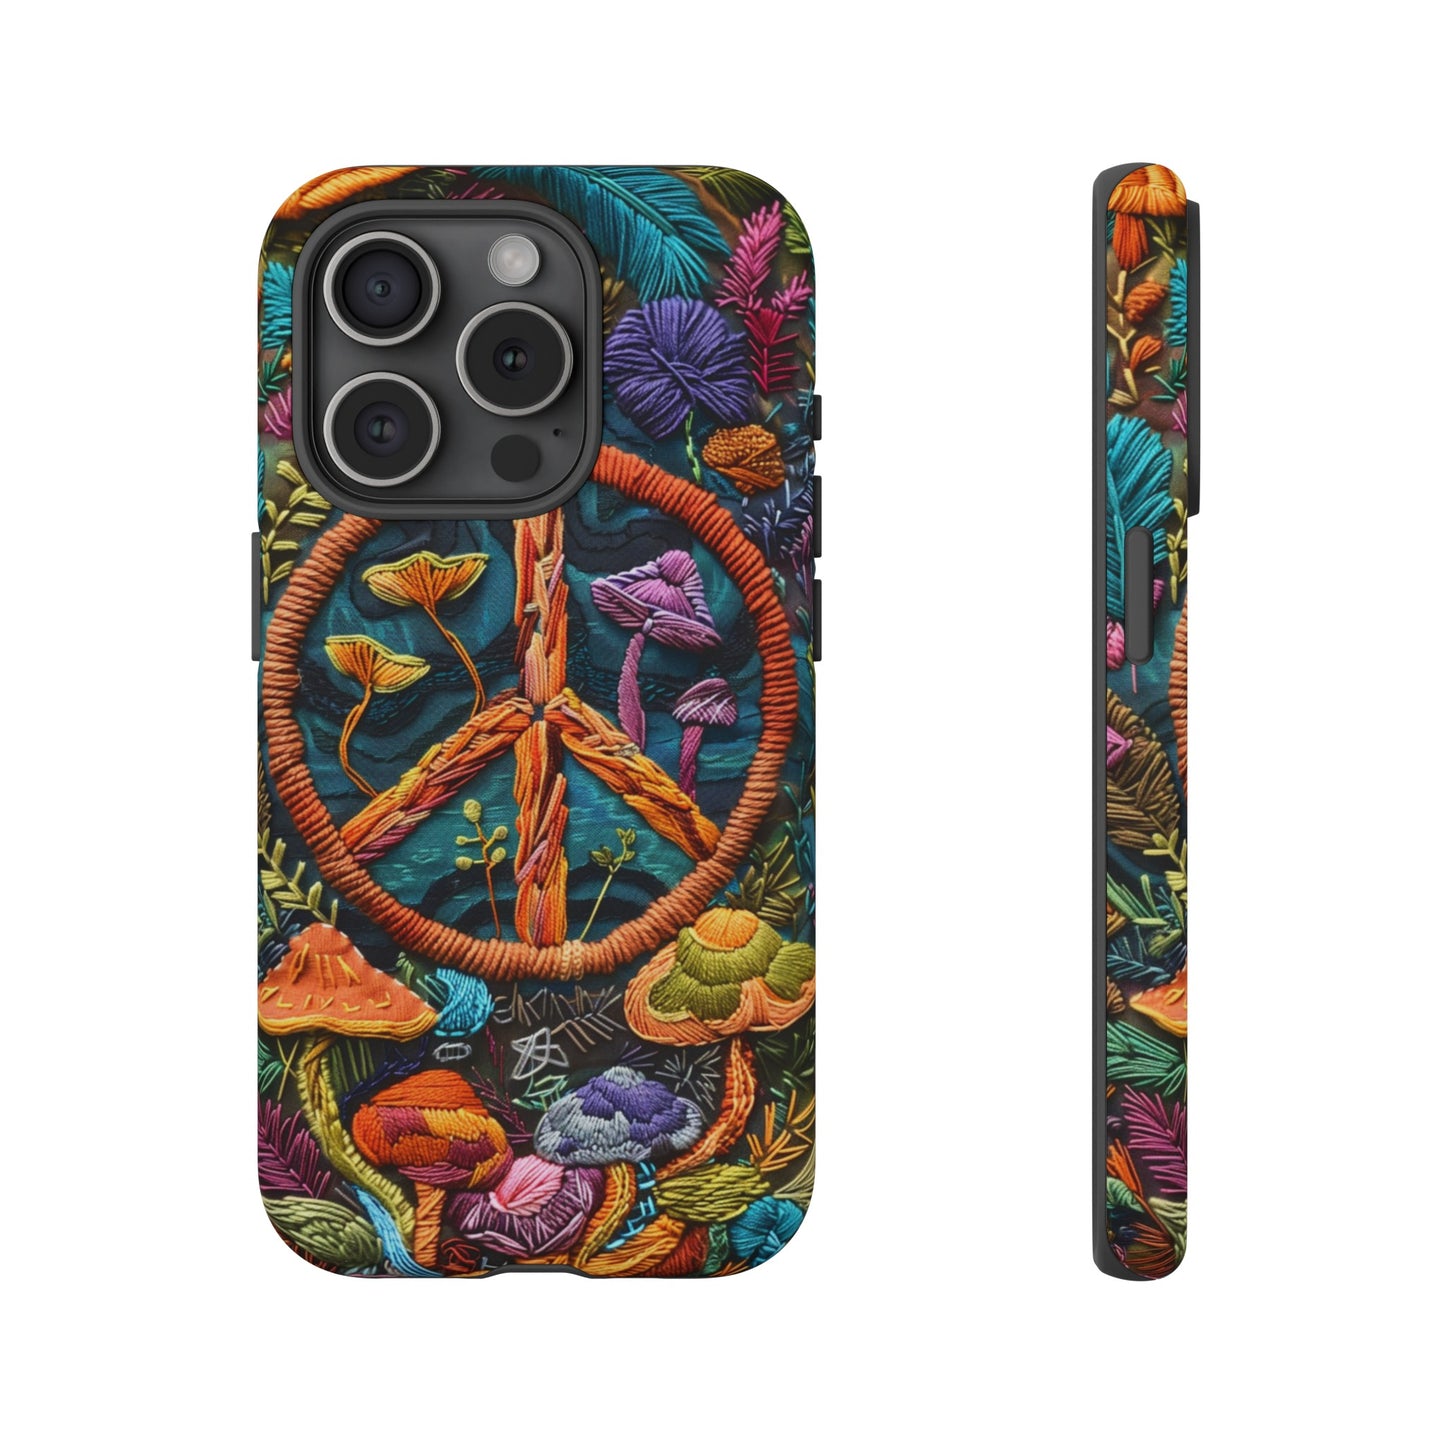 Embroidery Style Magic Mushrooms and Peace Sign Phone Case